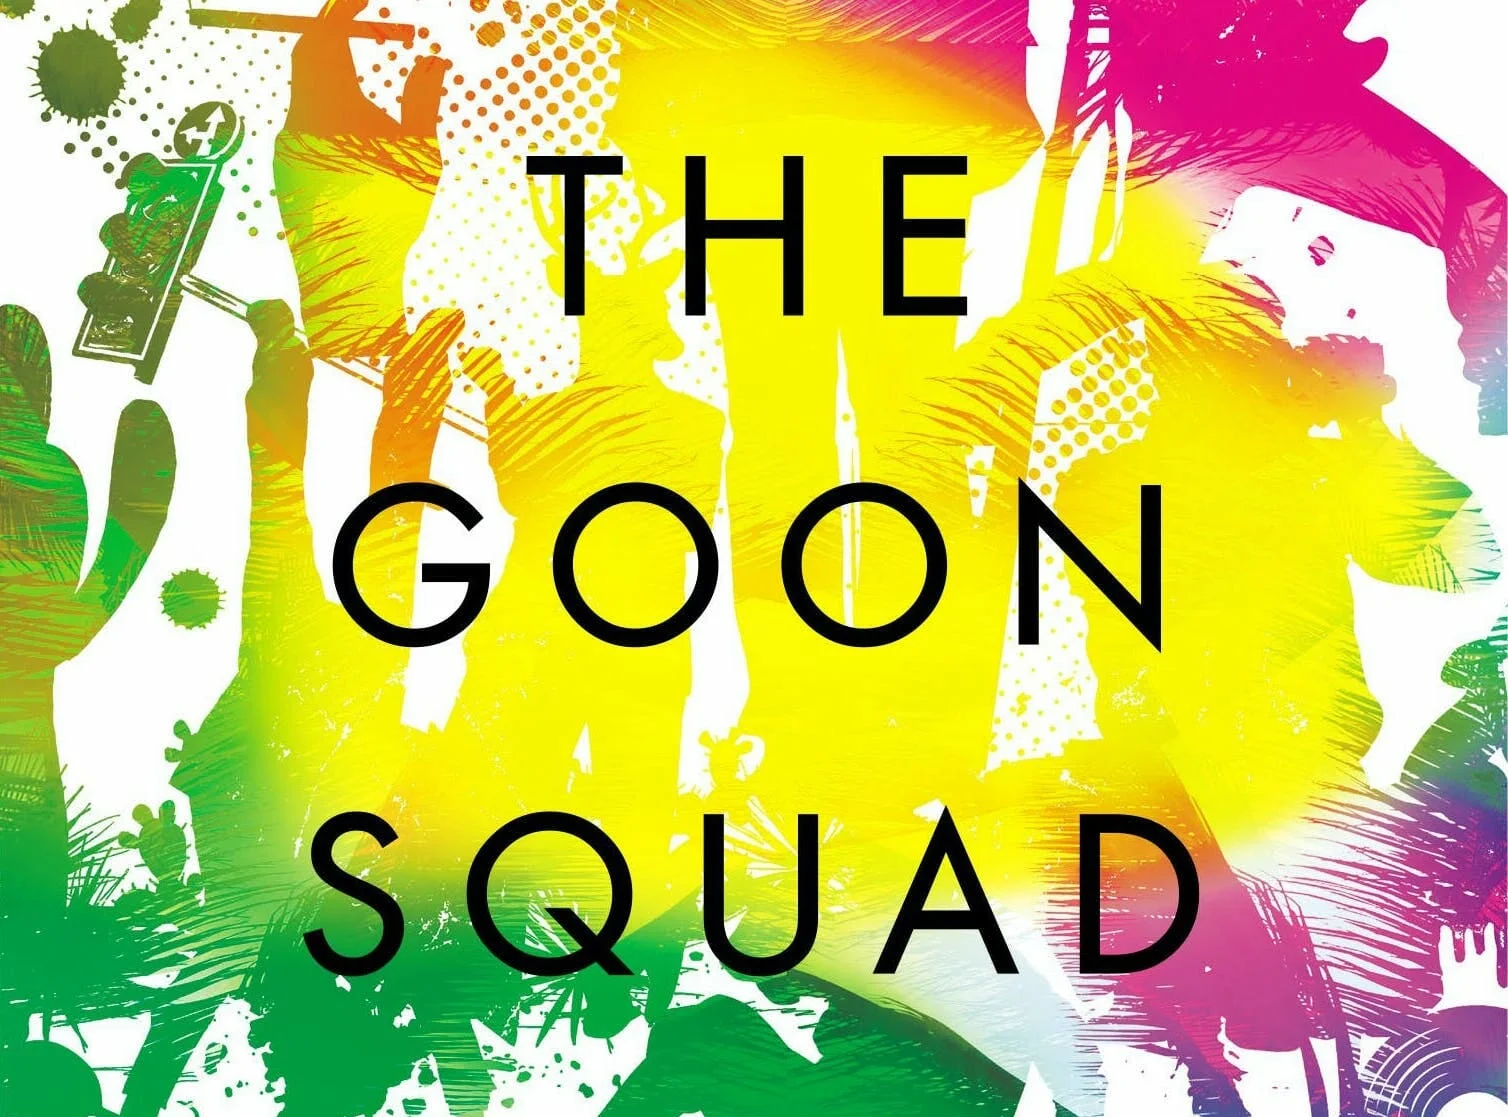 A Visit From the Goon Squad is a symphony of voices